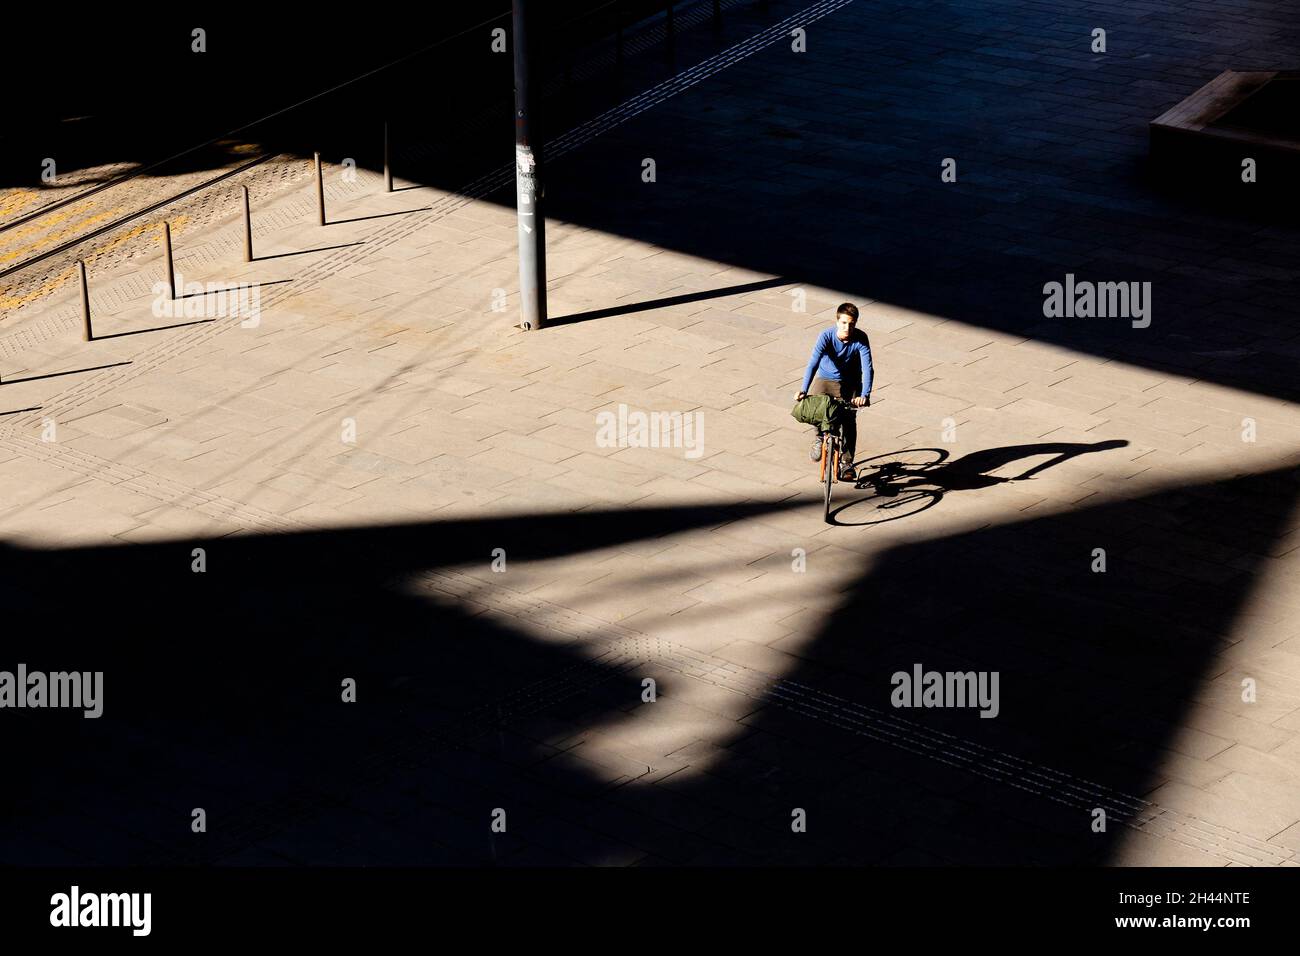 Belgrade, Serbia - October 26, 2020: One teenage boy riding bike on city square in sunlight, high angle view with shadows Stock Photo